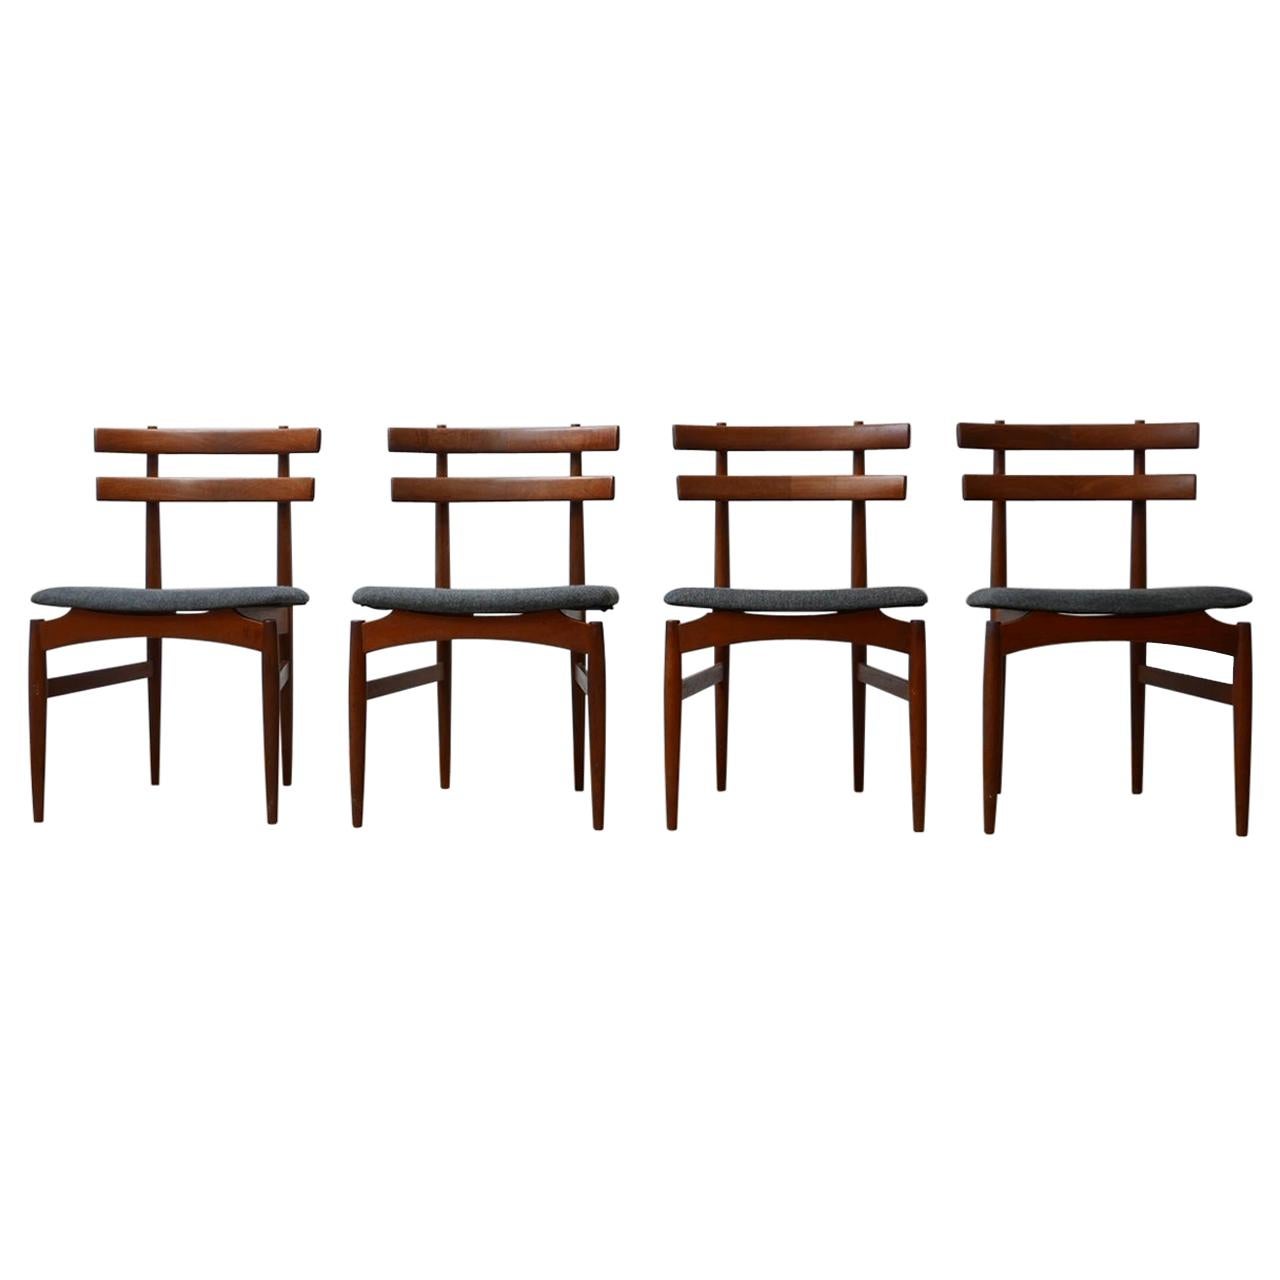 Teak Midcentury Dining Chairs by Poul Hundevad